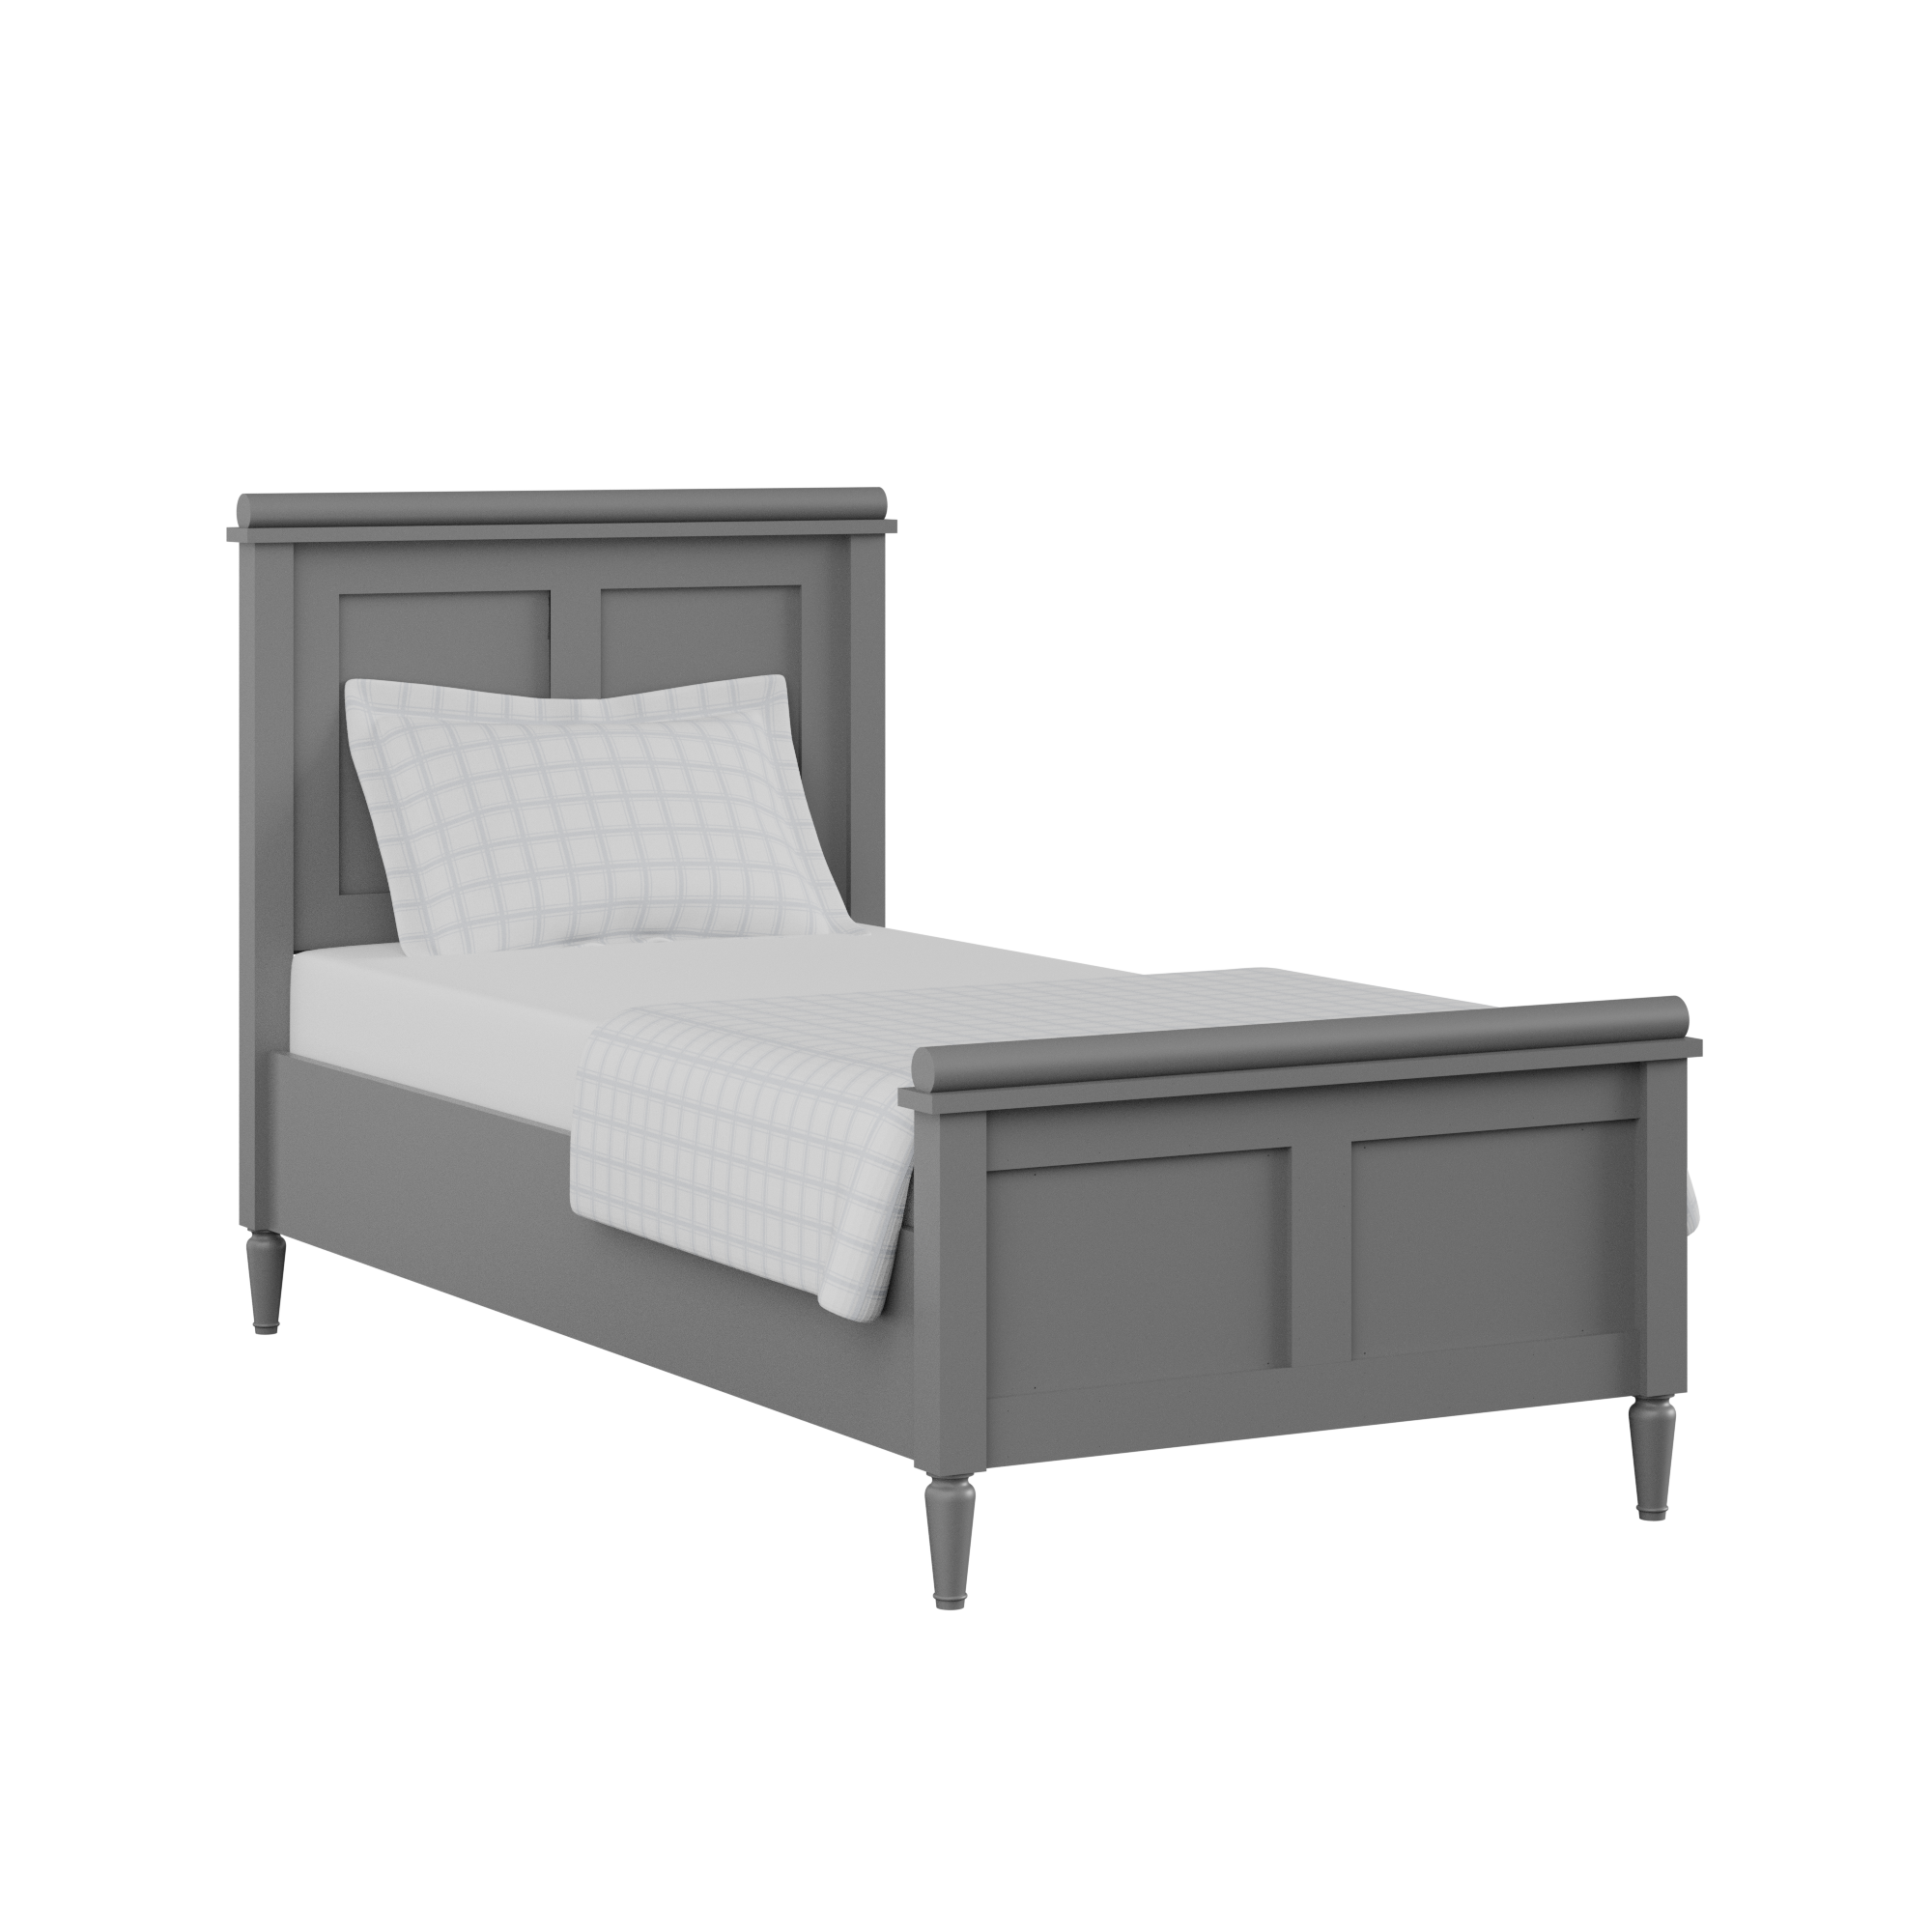 Nocturne Painted single painted wood bed in grey with Juno mattress